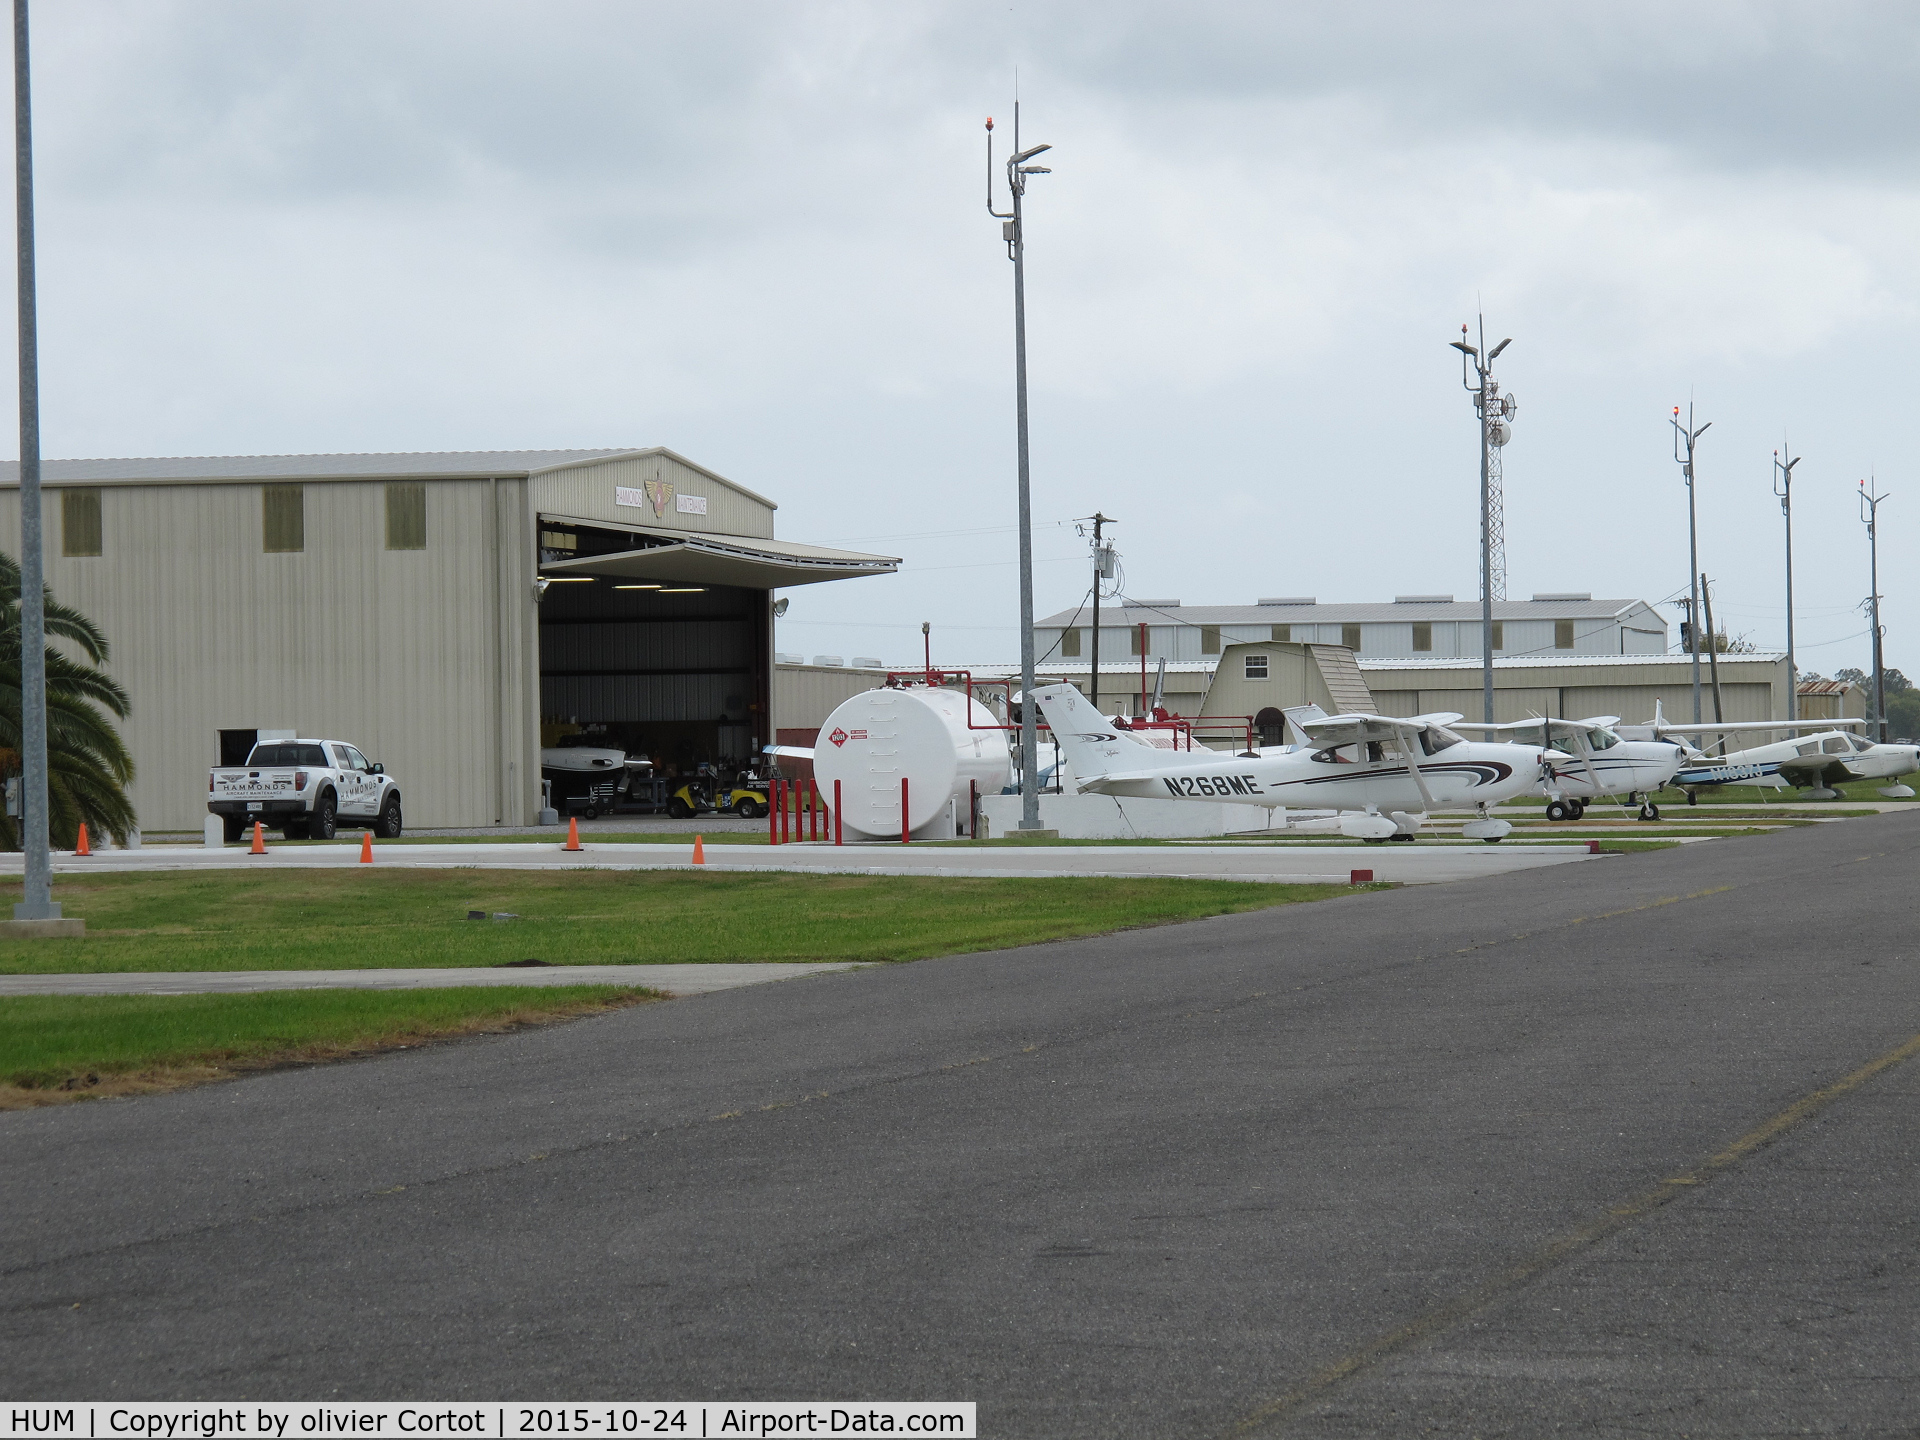 Houma-terrebonne Airport (HUM) - Large airport with many helicopters working with off-shore oil companies